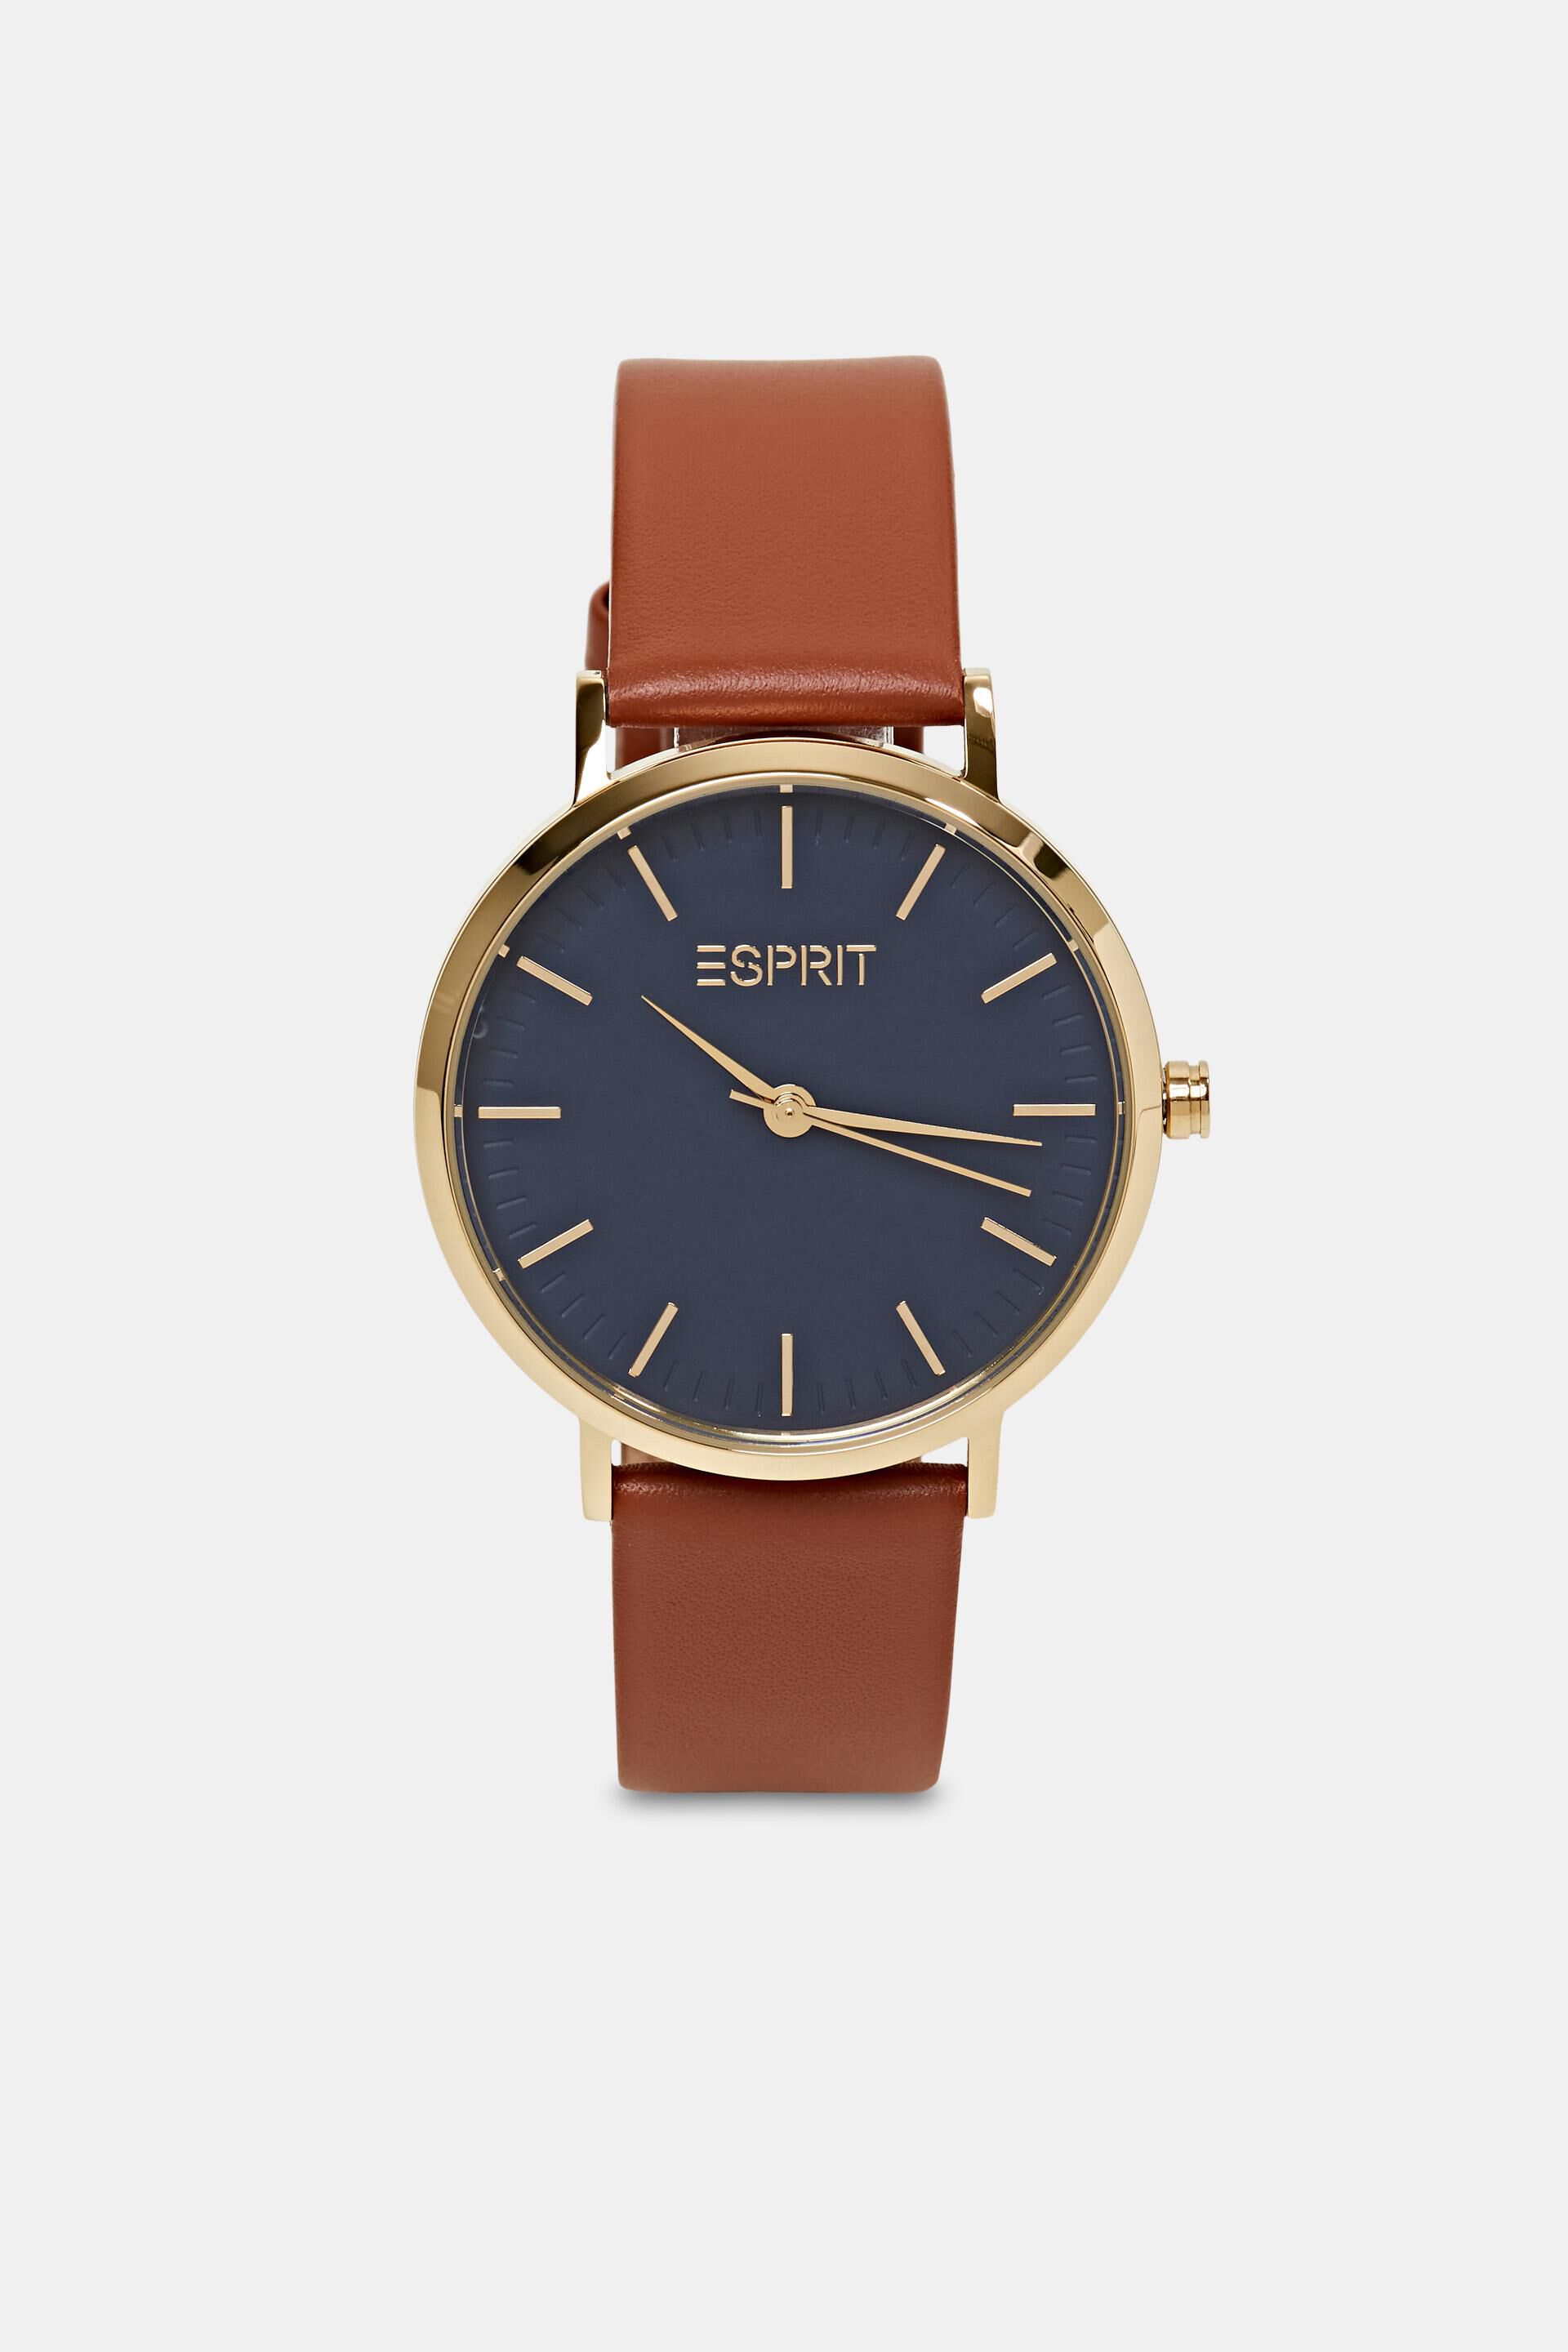 Esprit Leather Stainless Watch Gold-Tone Steel